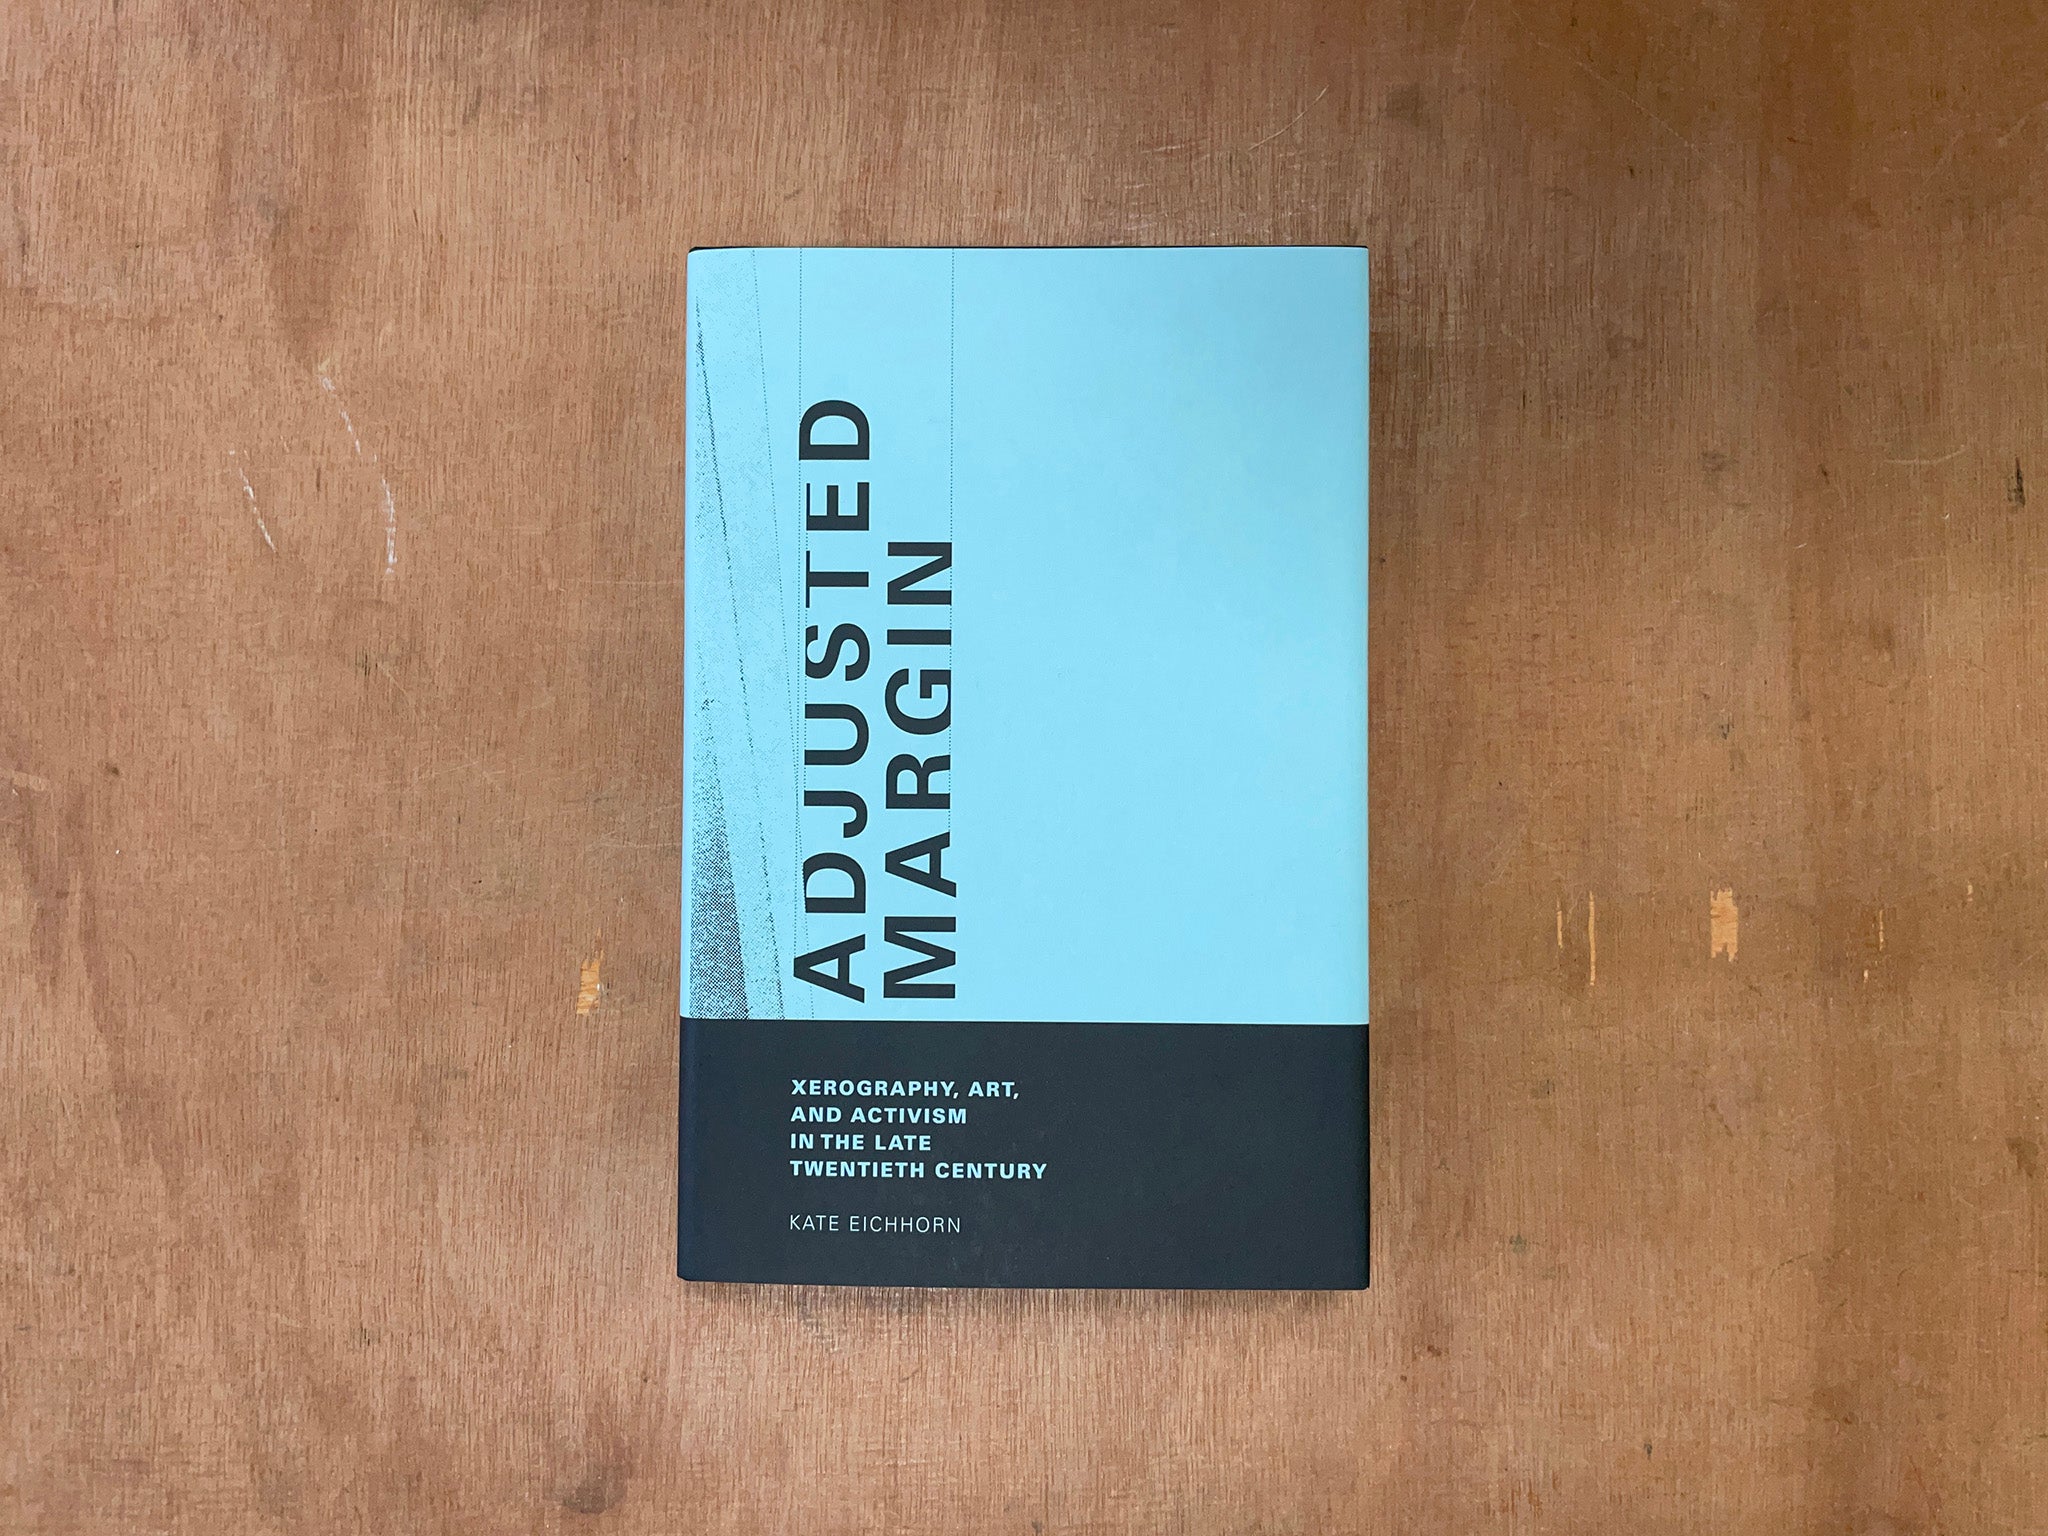 ADJUSTED MARGIN: XEROGRAPHY, ART, AND ACTIVISM IN THE LATE TWENTIETH CENTURY by Kate Eichhorn